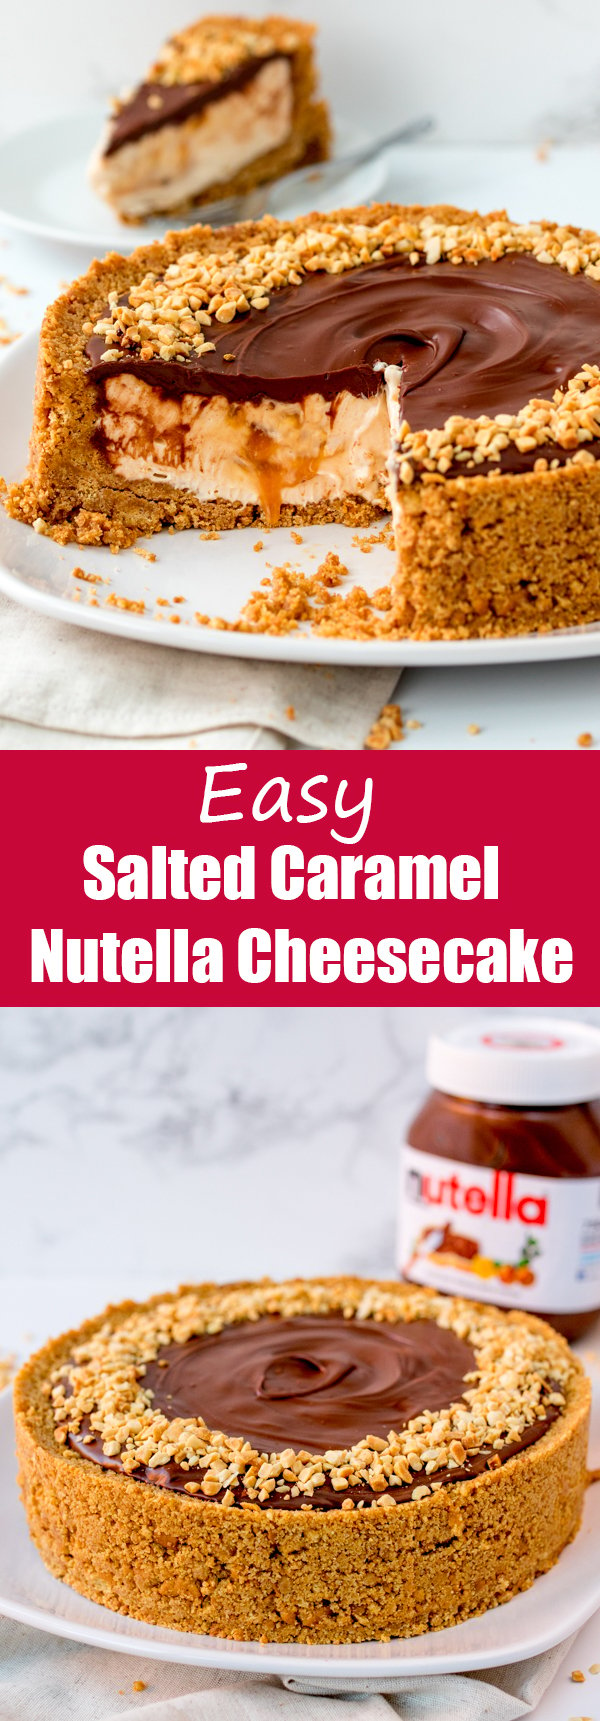 easy nutella salted caramel cheesecake pin